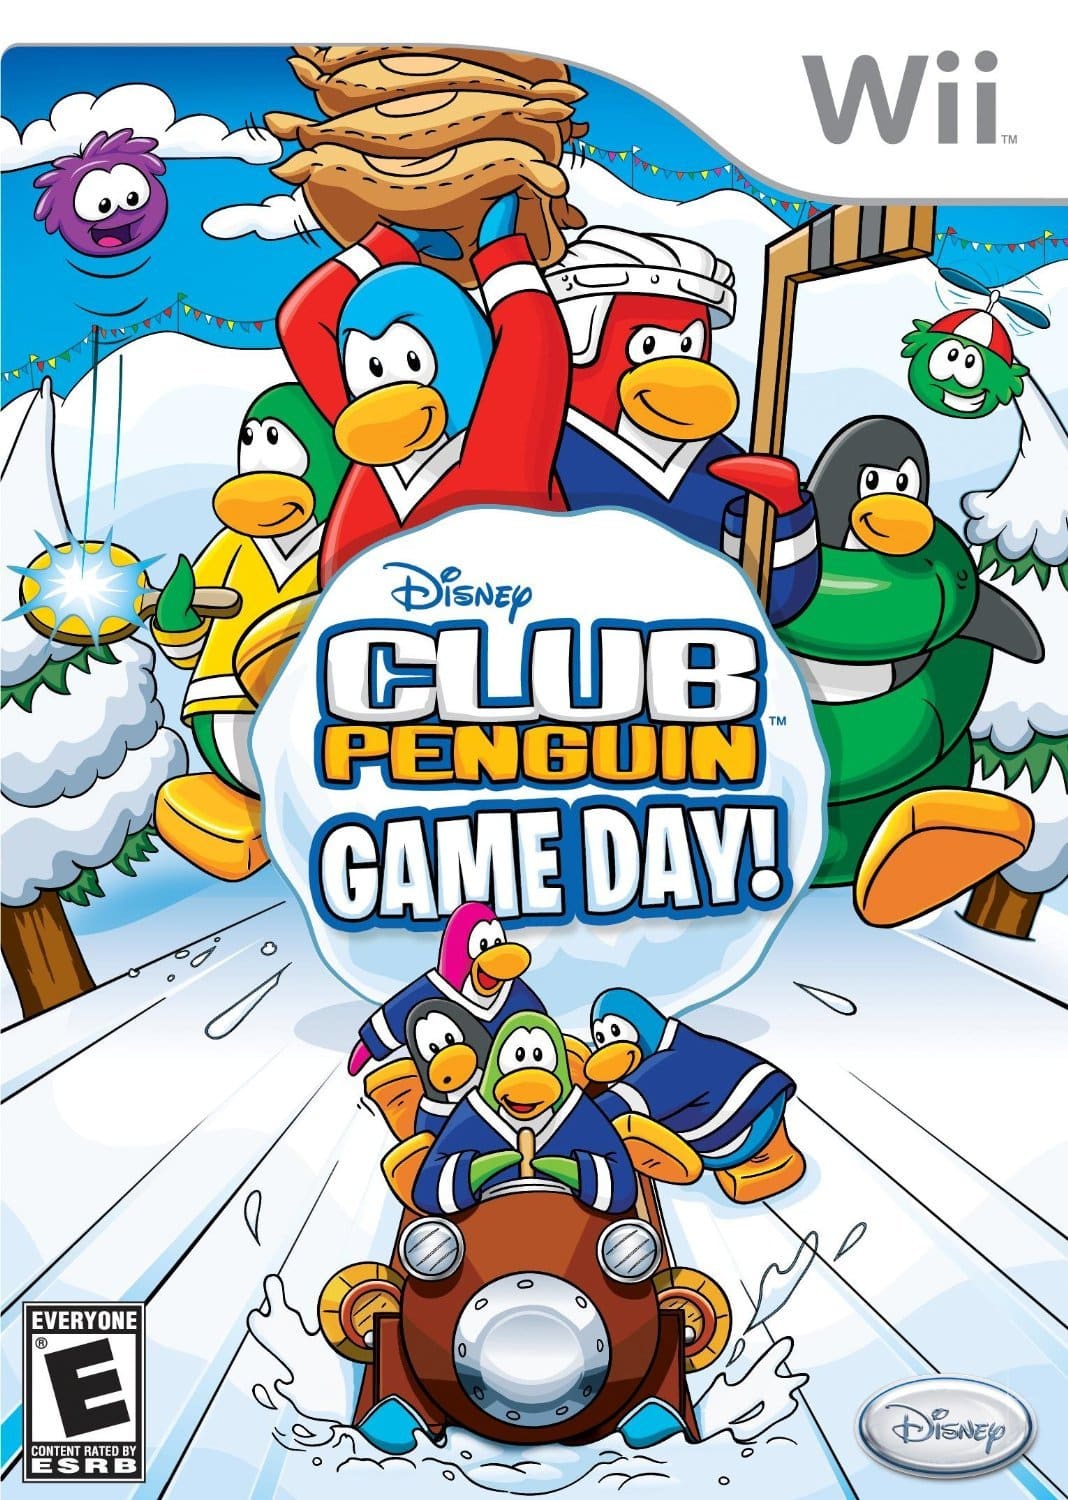 Club Penguin: Game Day! player count stats